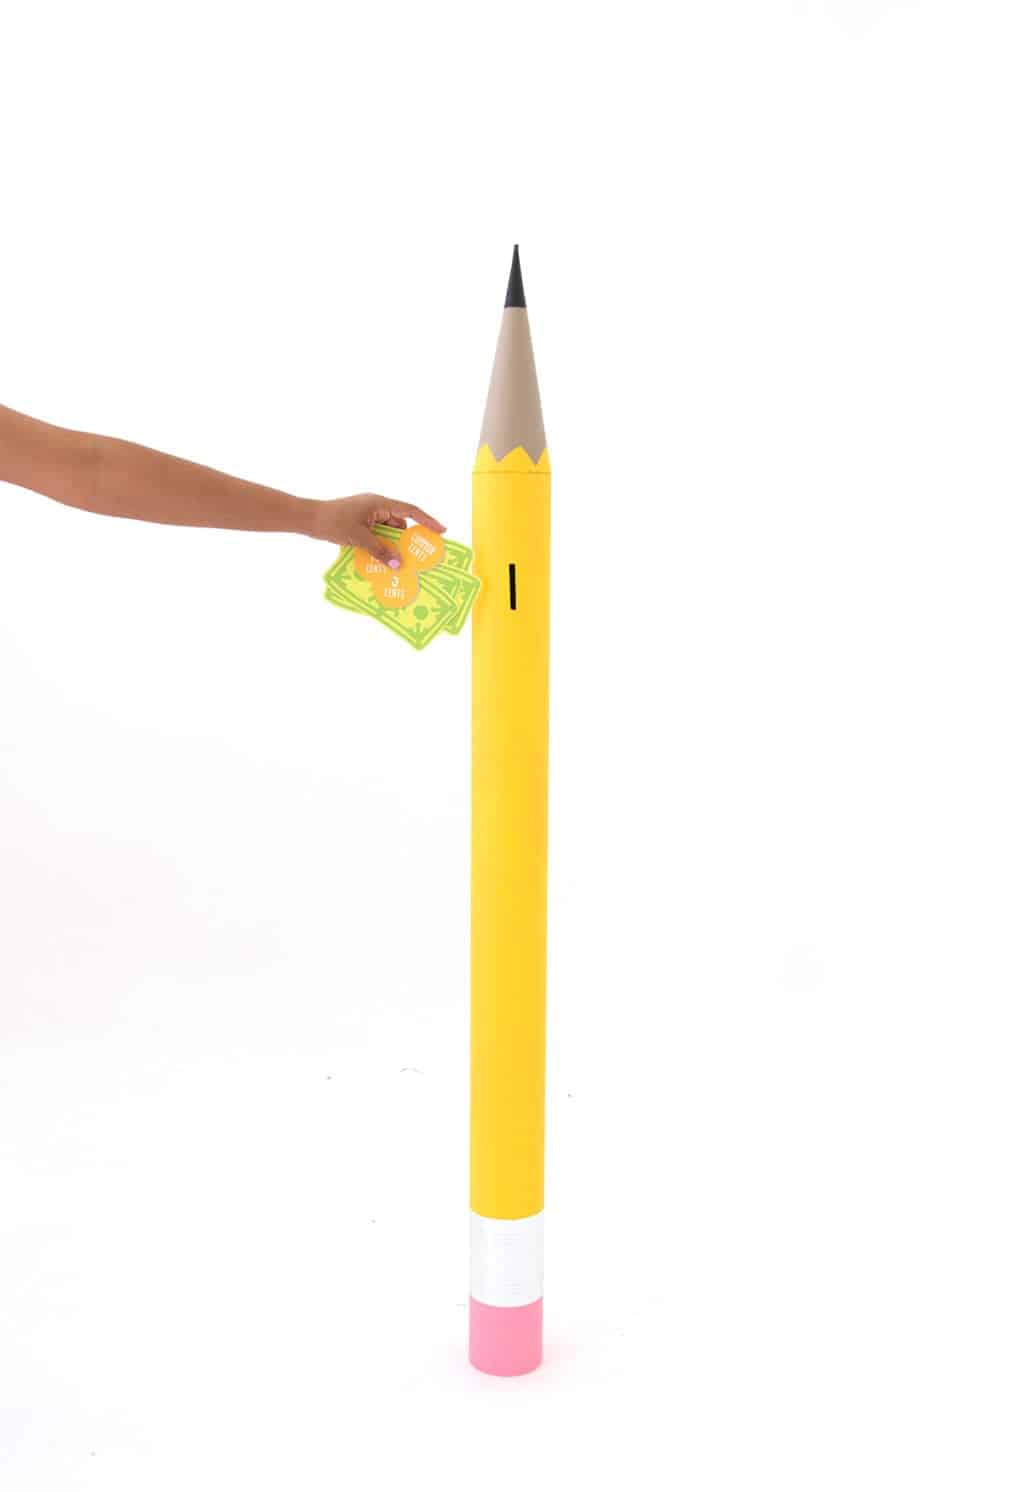 Giant mail tube pencil piggy bank